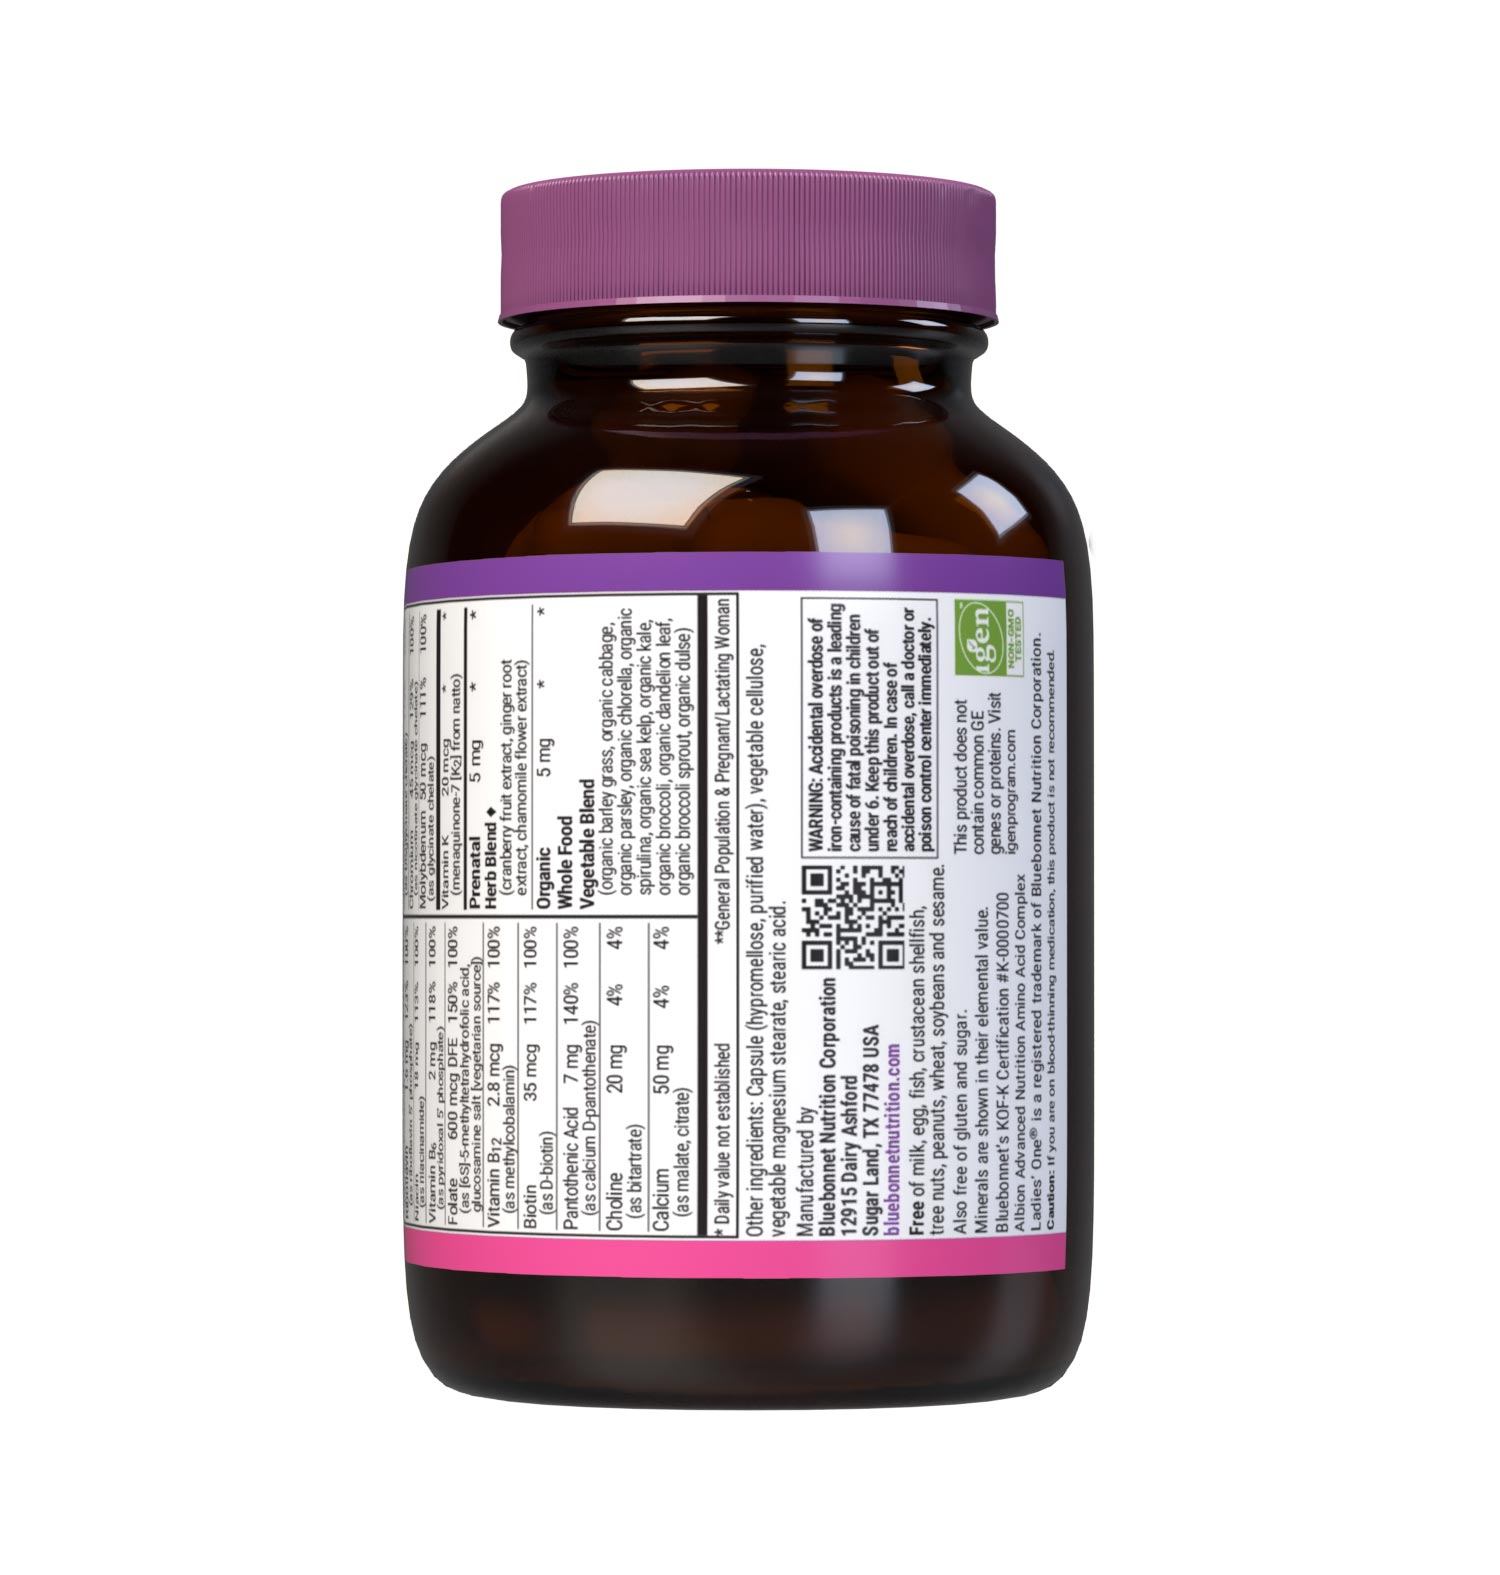 Bluebonnet's Ladies One prenatal whole food-based multiple 30 vegetable capsules is formulated with highly bioavailable non-GMO ingredients such as active coenzyme forms of B vitamins, vitamin K2, vitamin E from sunflower along with sustainably harvested and wildcrafted herbs, superfruits and vegetables. Supplement facts panel bottom. #size_30 count